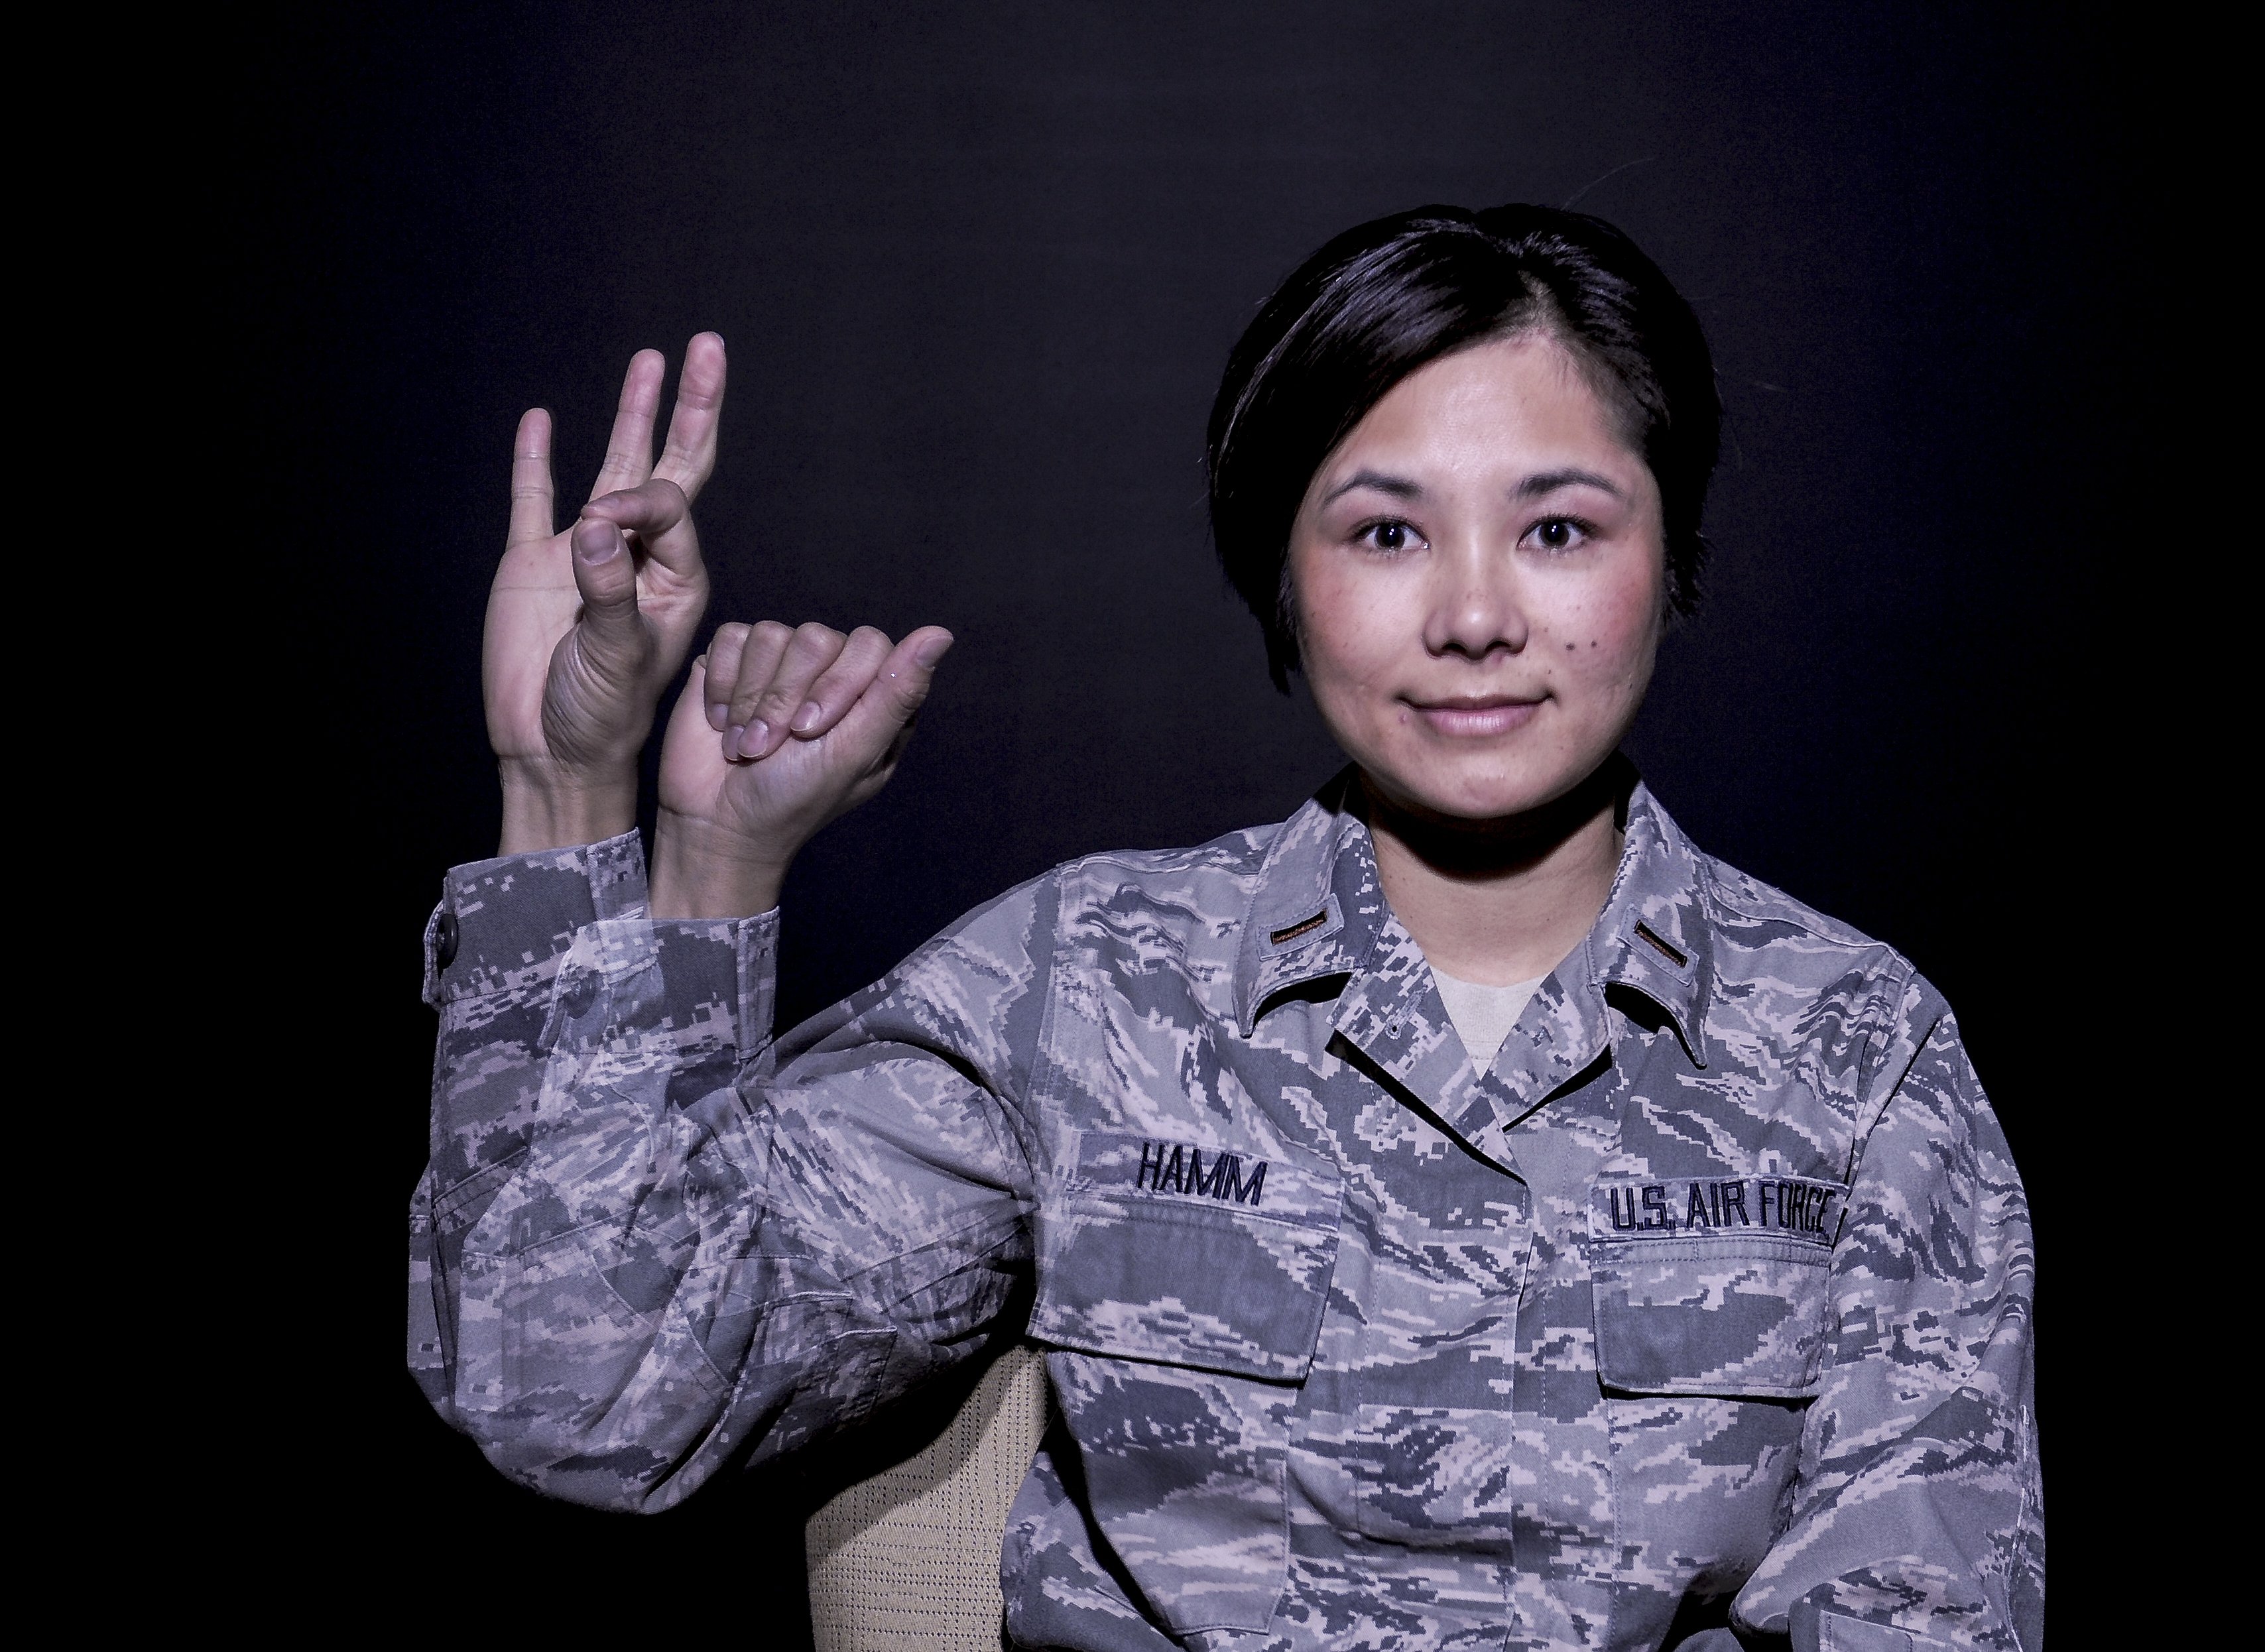 Through Airmen S Eyes More Than Words Airman Shares Passion For Sign Language U S Air Force Article Display